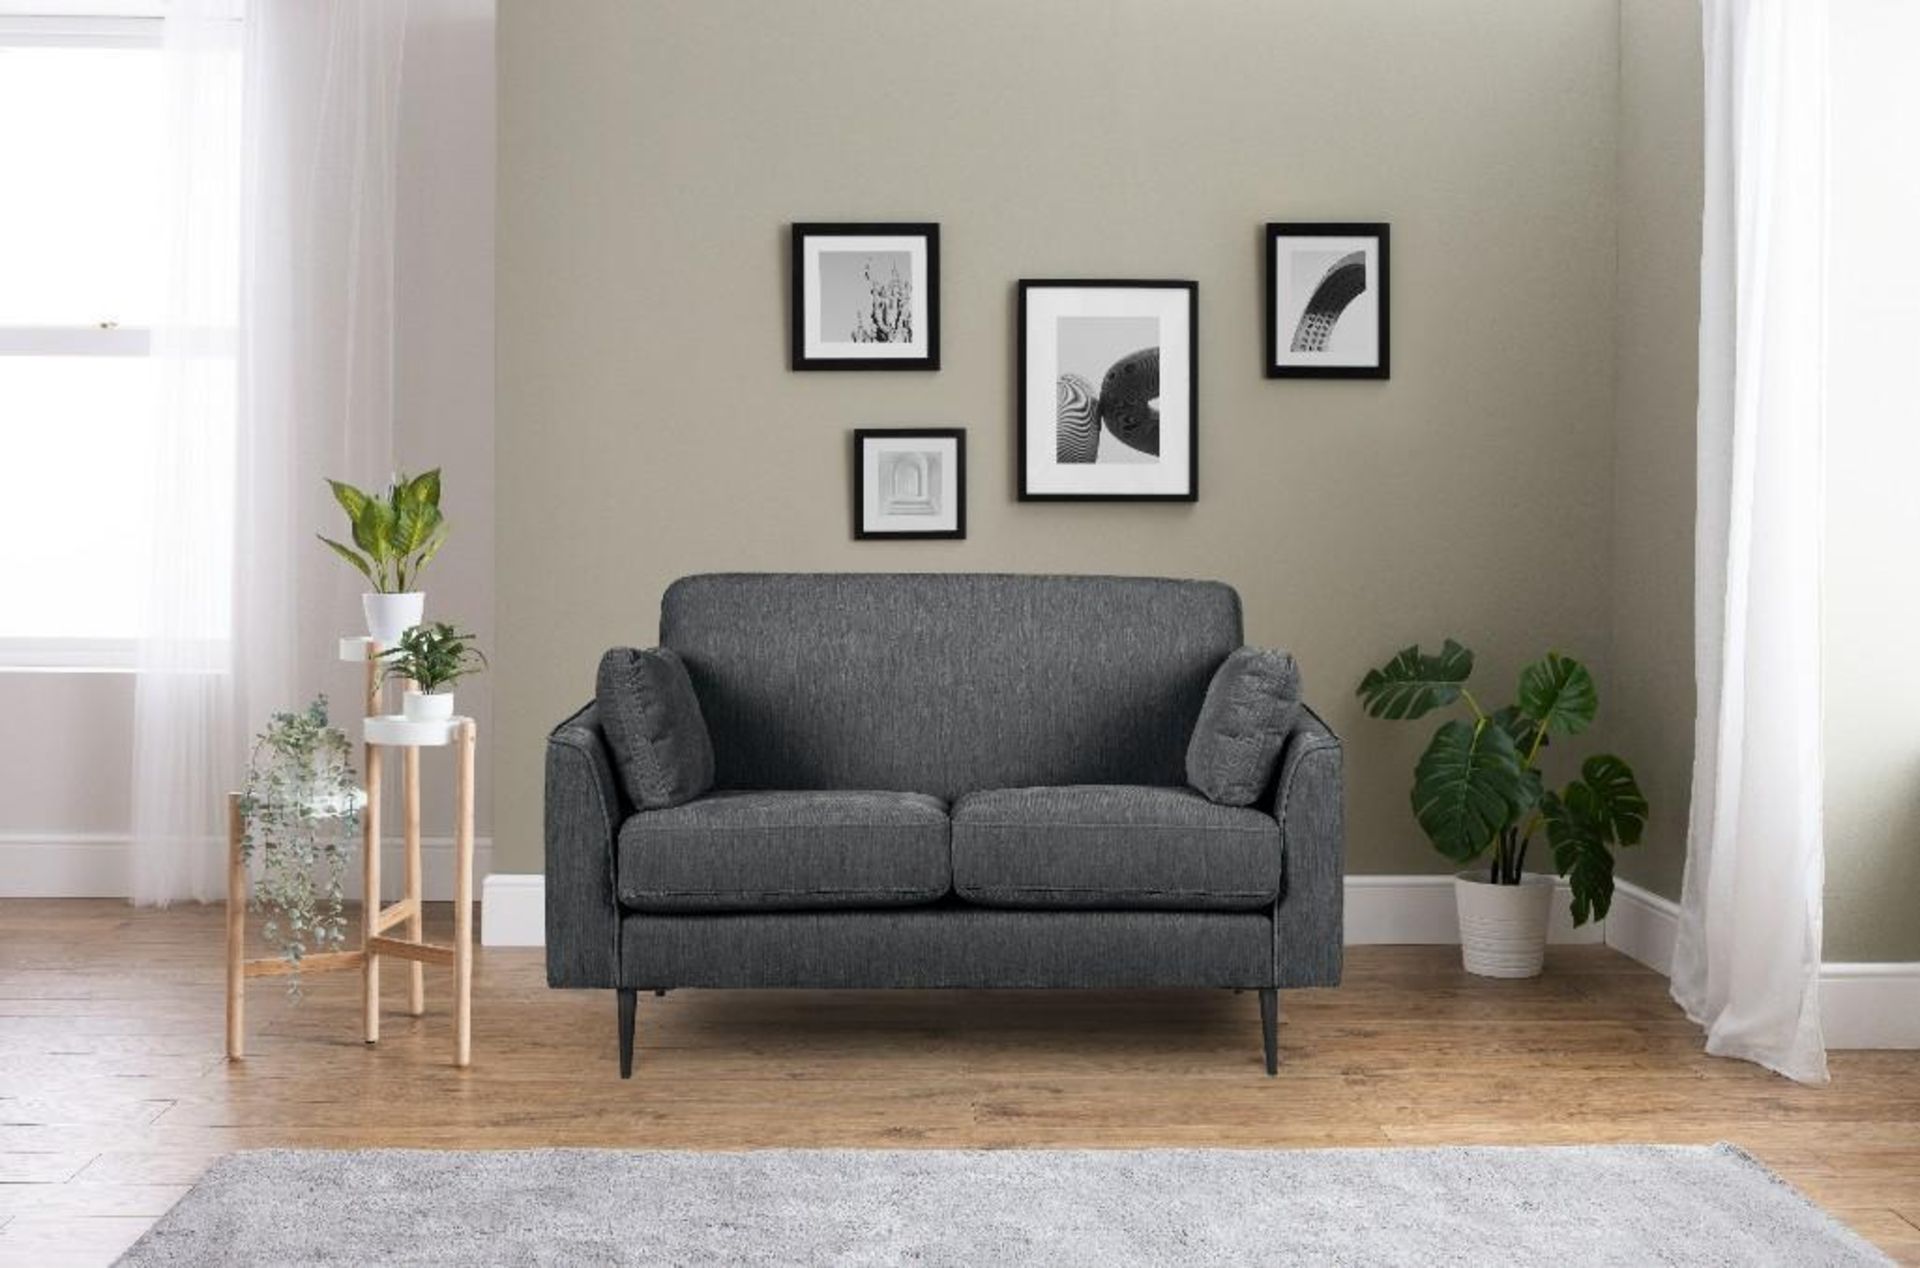 Brand new Boxed Vista 2 seater sofa in Charcoal